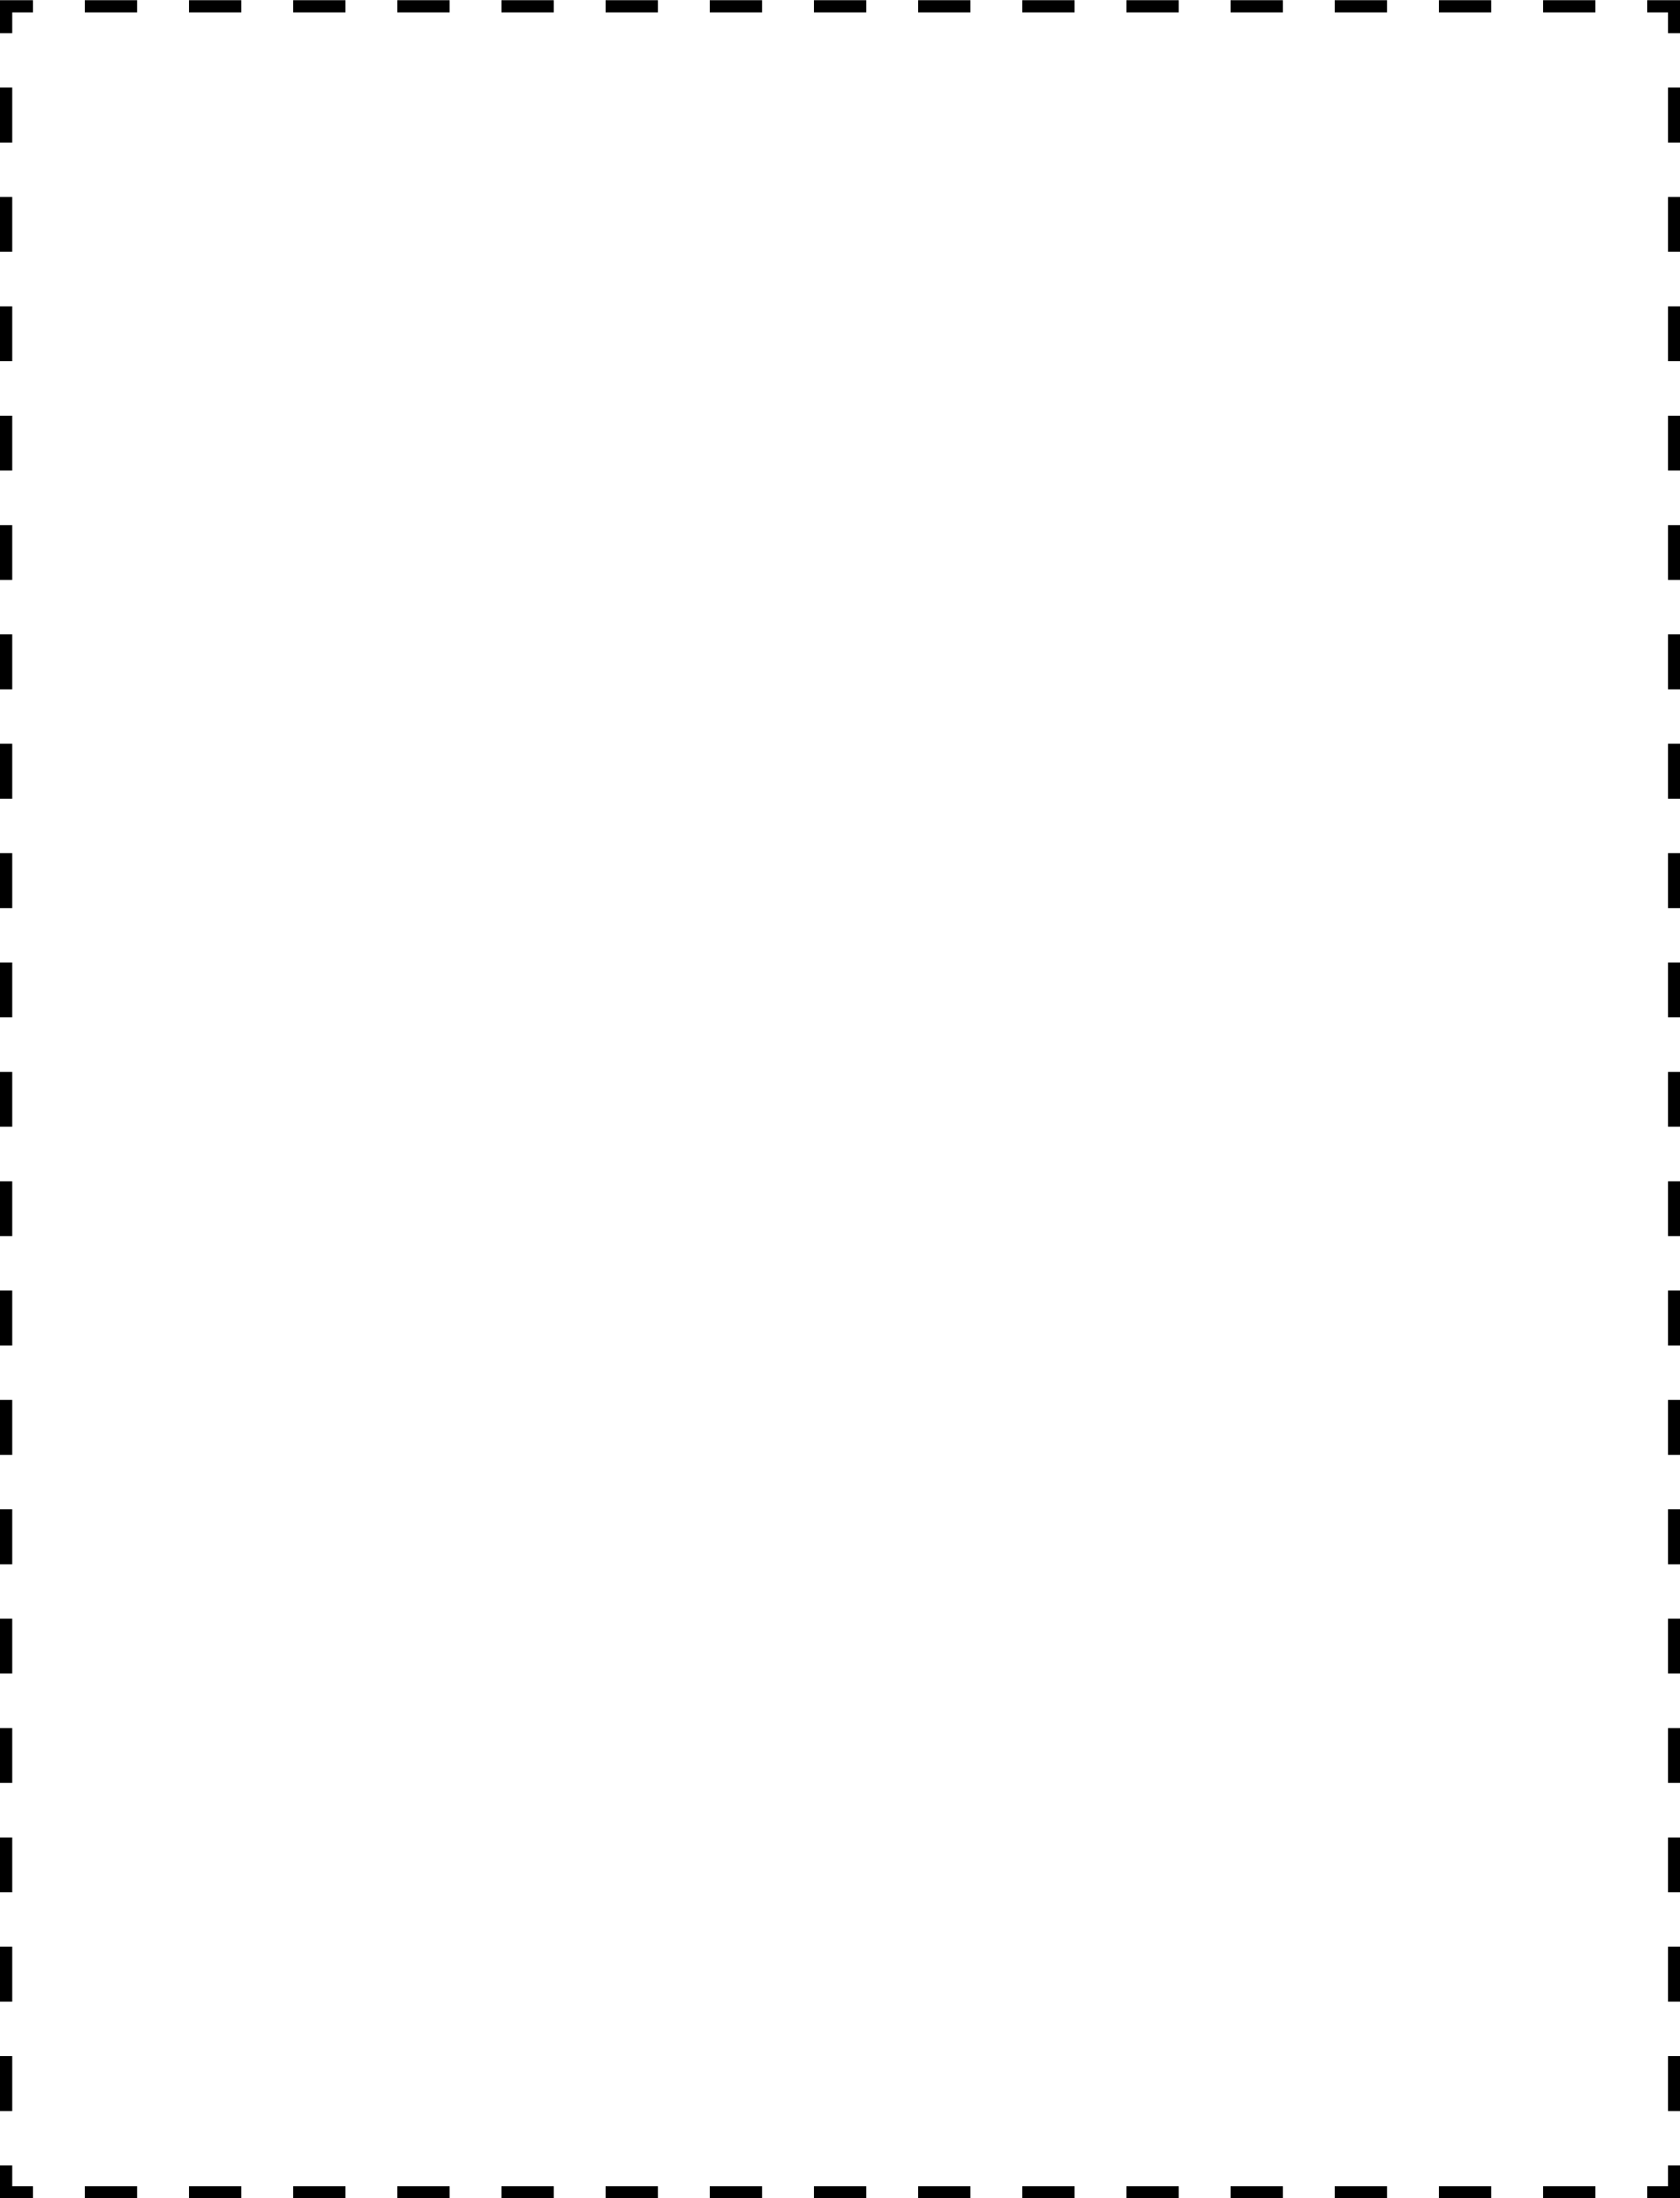 2512-coupon-outline-4x5-k.png